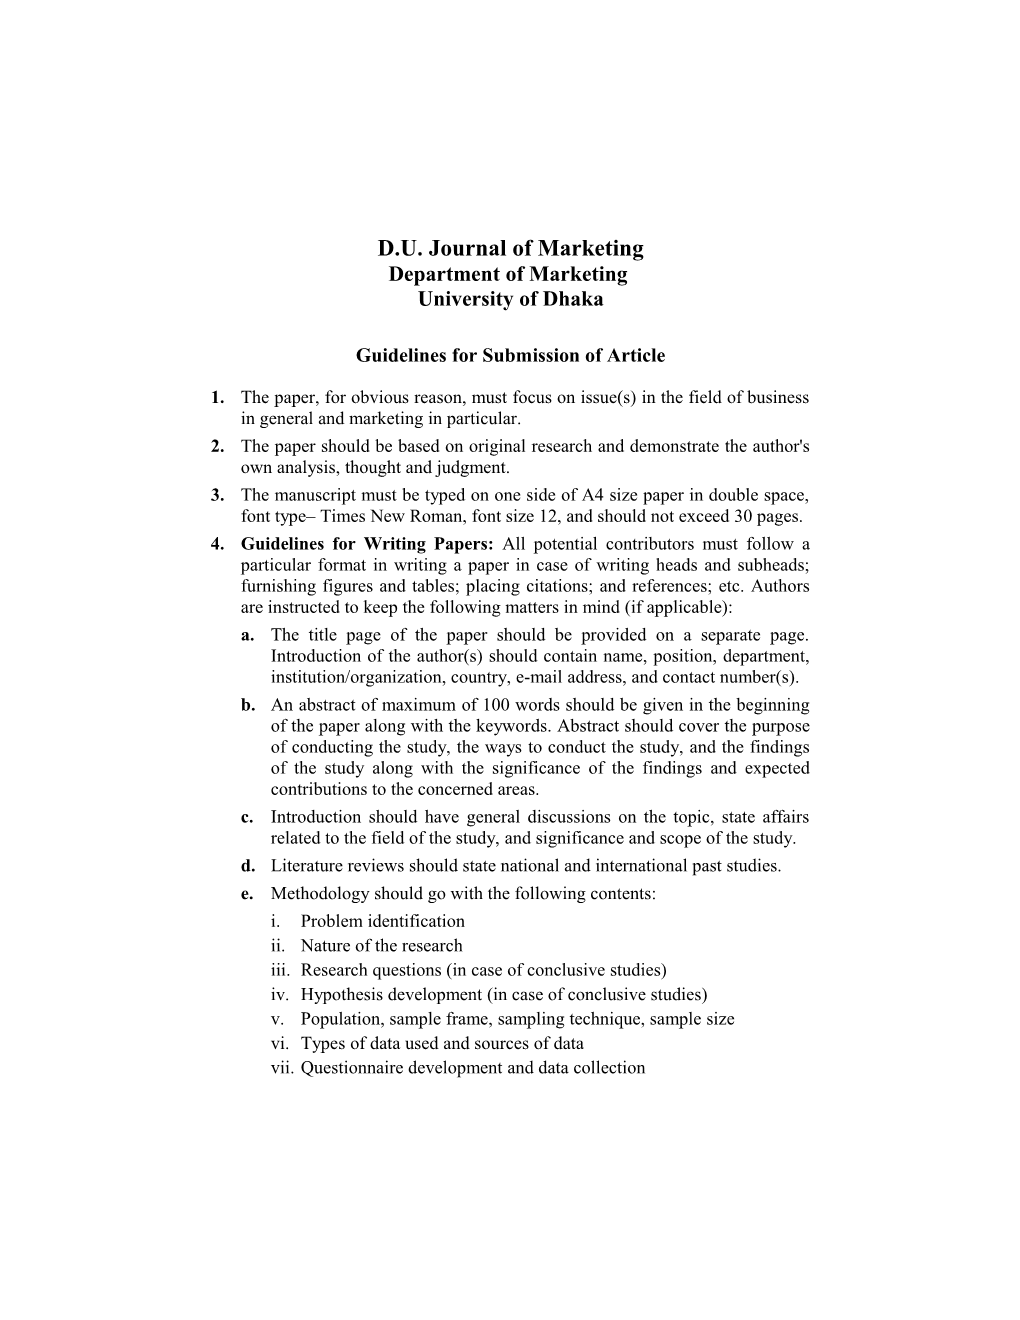 Guidelines for Submission of Article